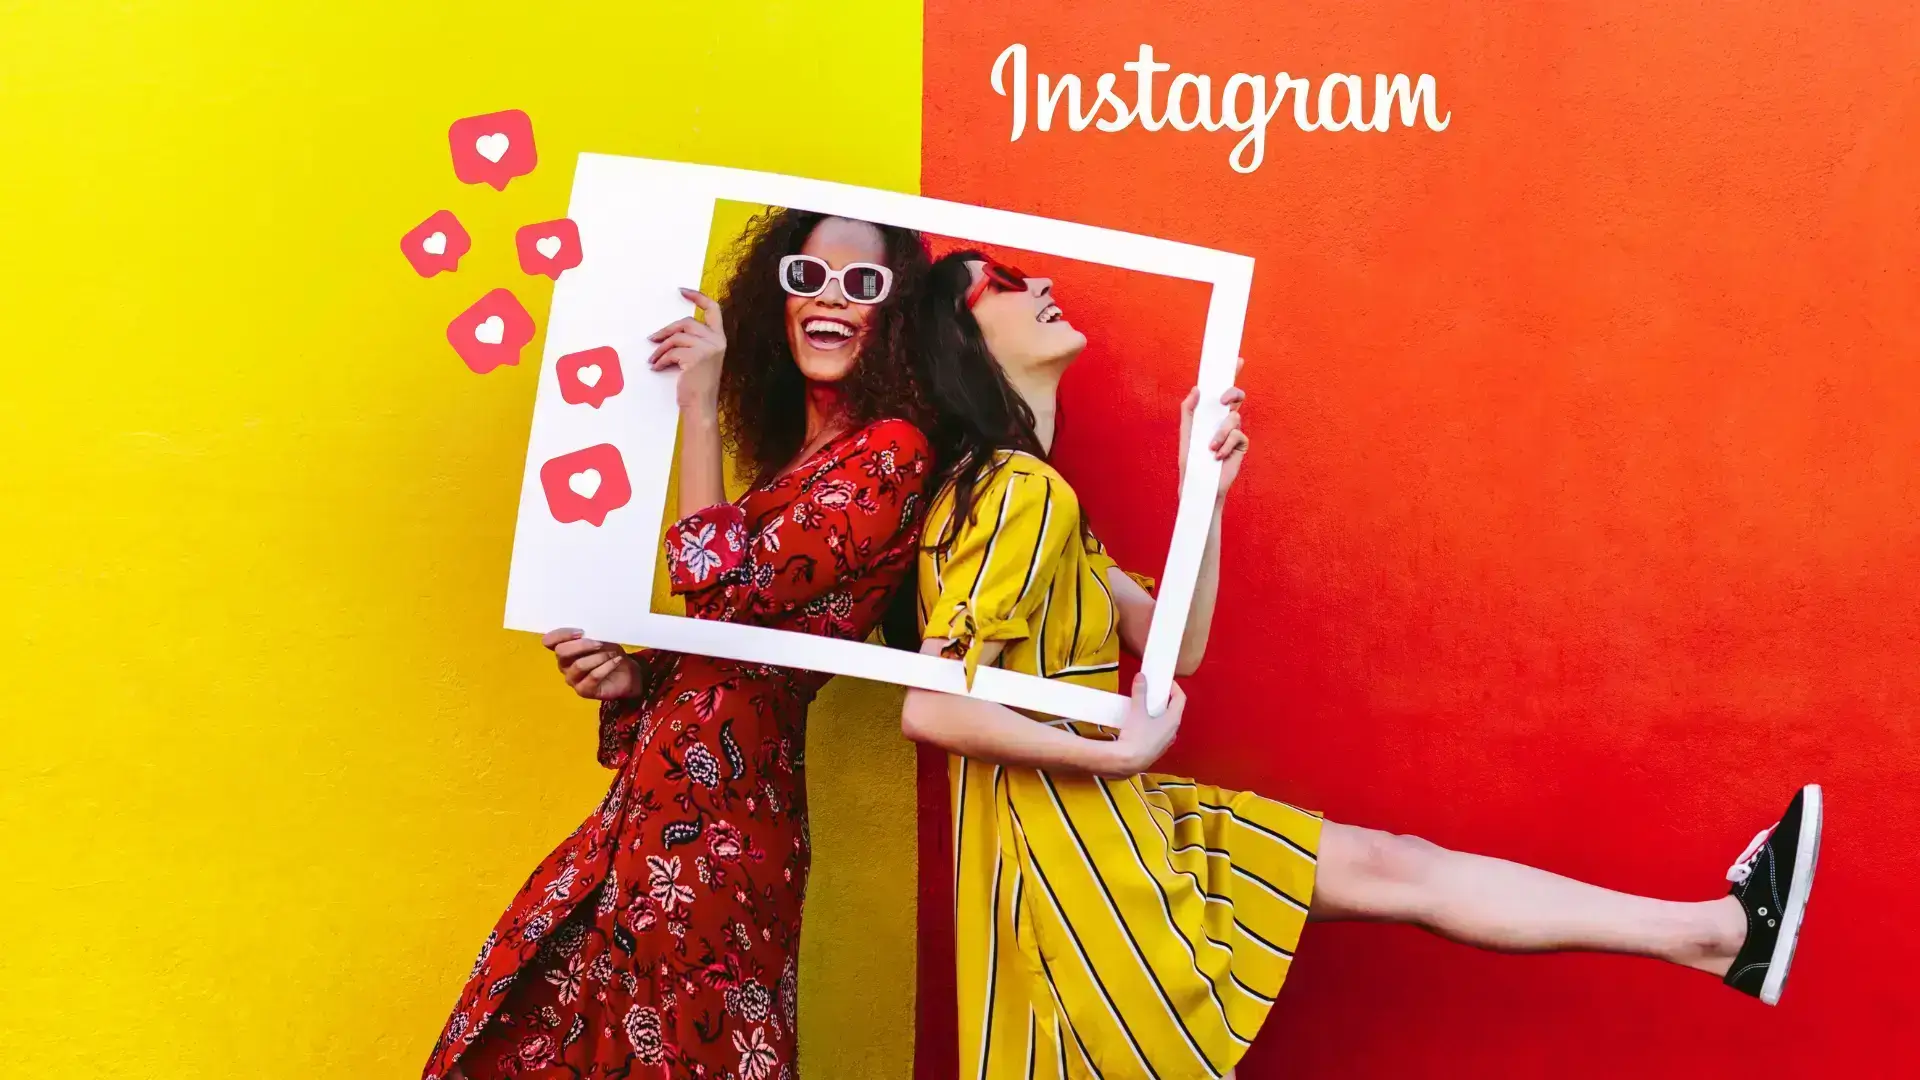 Instagram Best Practices - 8 Content Tricks Used By Top Brands